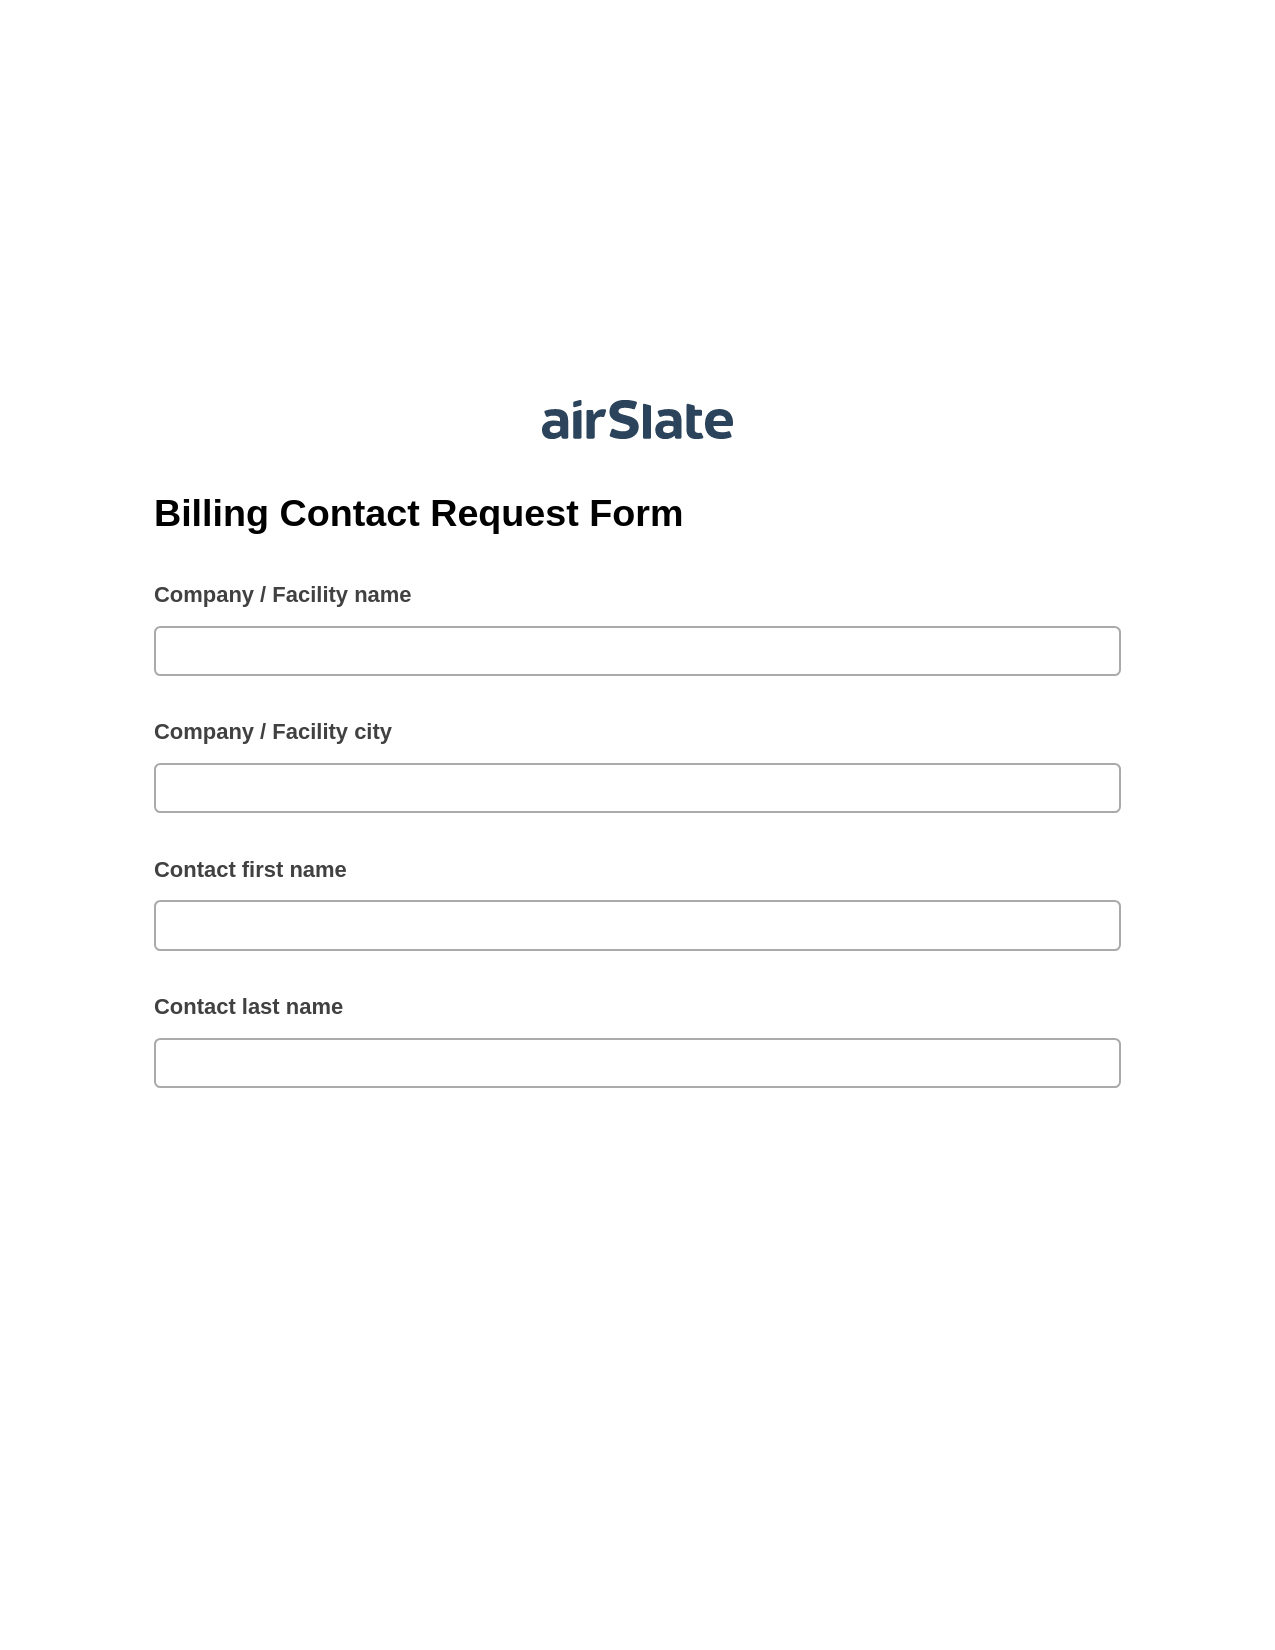 Multirole Billing Contact Request Form Pre-fill Document Bot, Create Salesforce Record Bot, Google Drive Bot